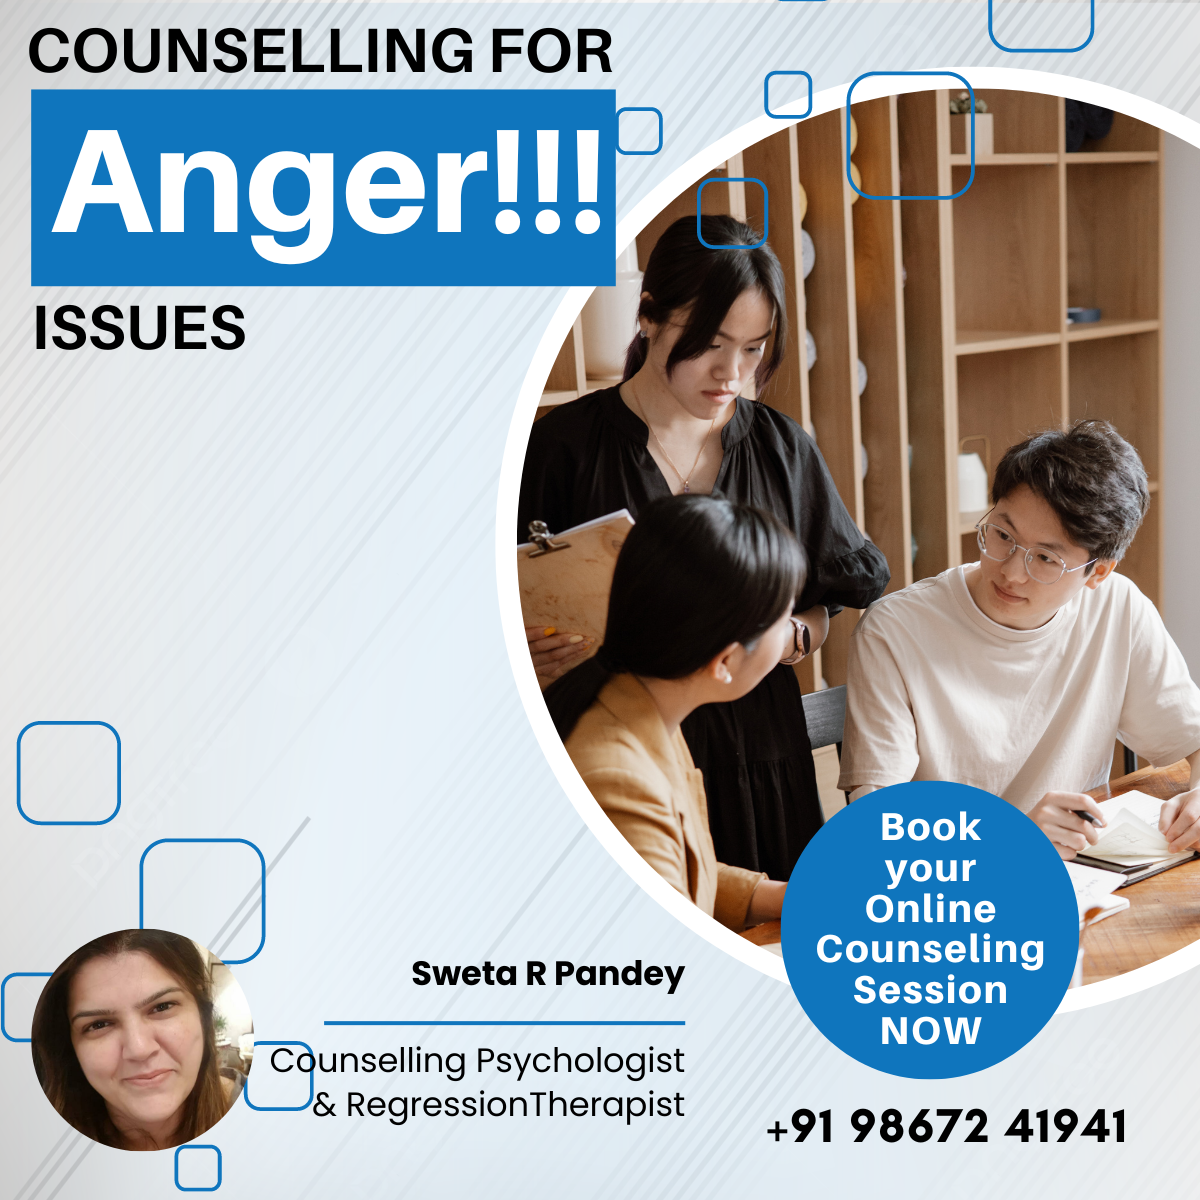 Counselling for Anger Issues - Sweta R Pandey - Vijayawada